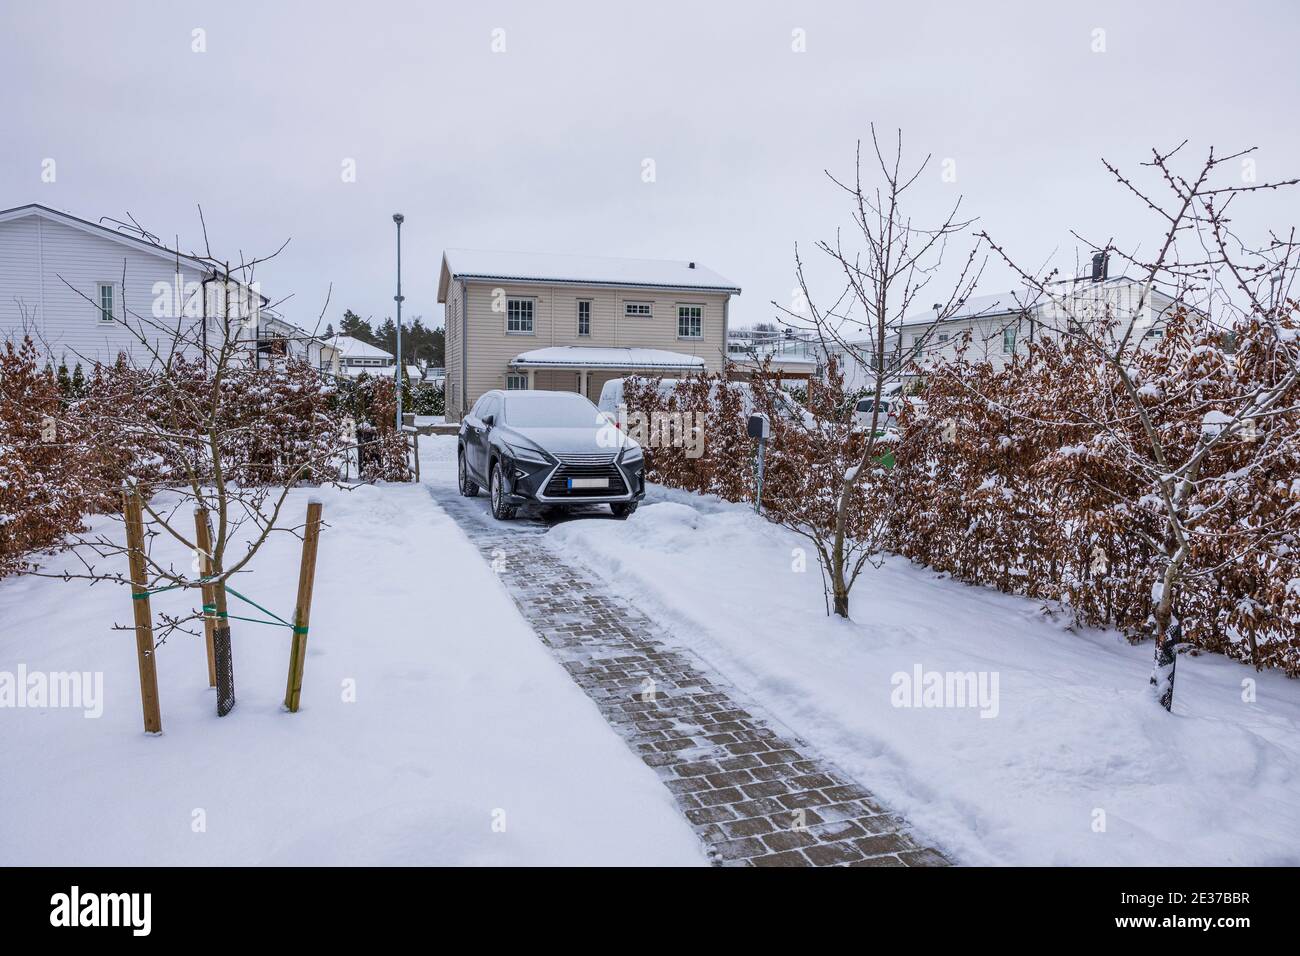 View of winter landscape of private area. Car, trees and bushes covered with snow. Beautiful white villas on background. Stock Photo